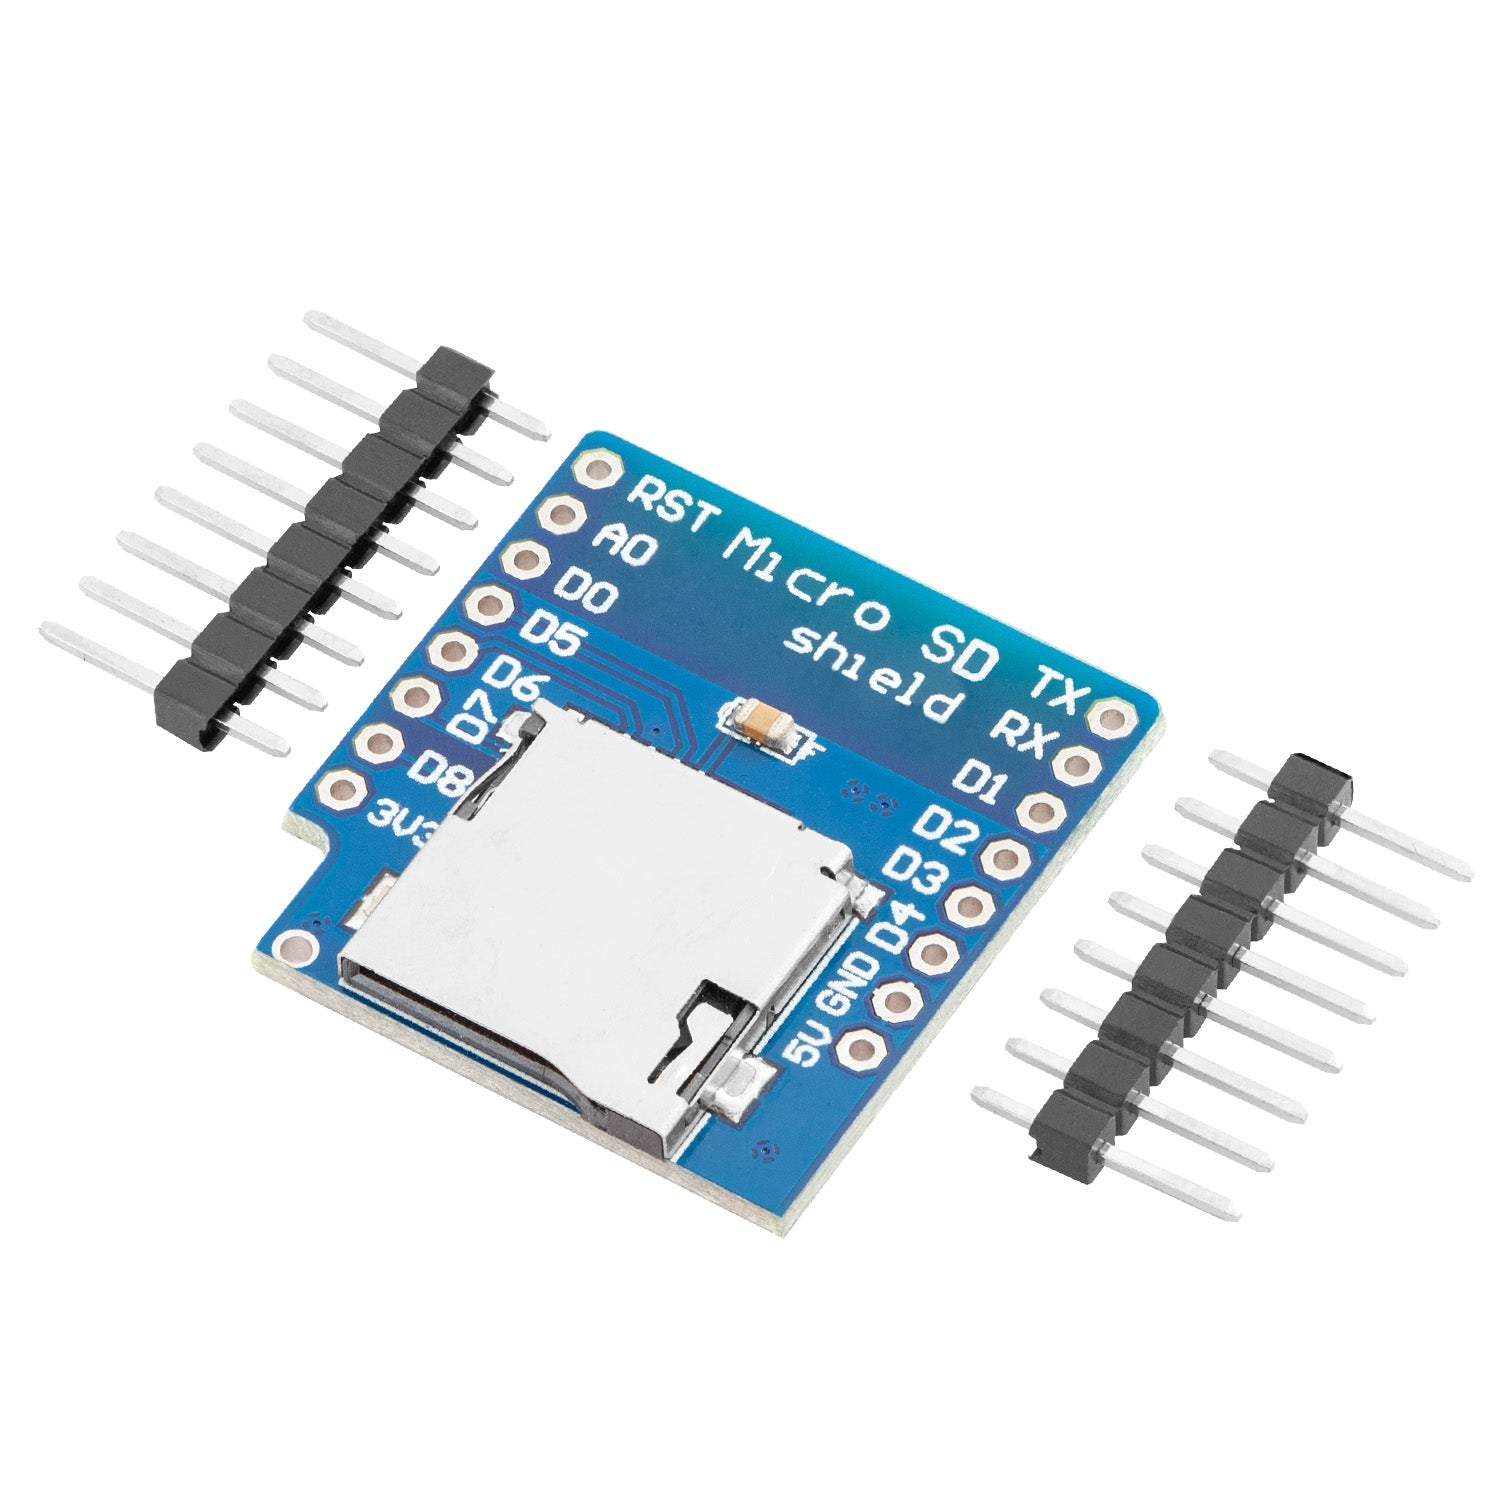 Micro SD Card D1 Mini Shield Adapter - 8 Pin 3.3V SD Card Reader Module  with SPI Interface, Compatible with Arduino